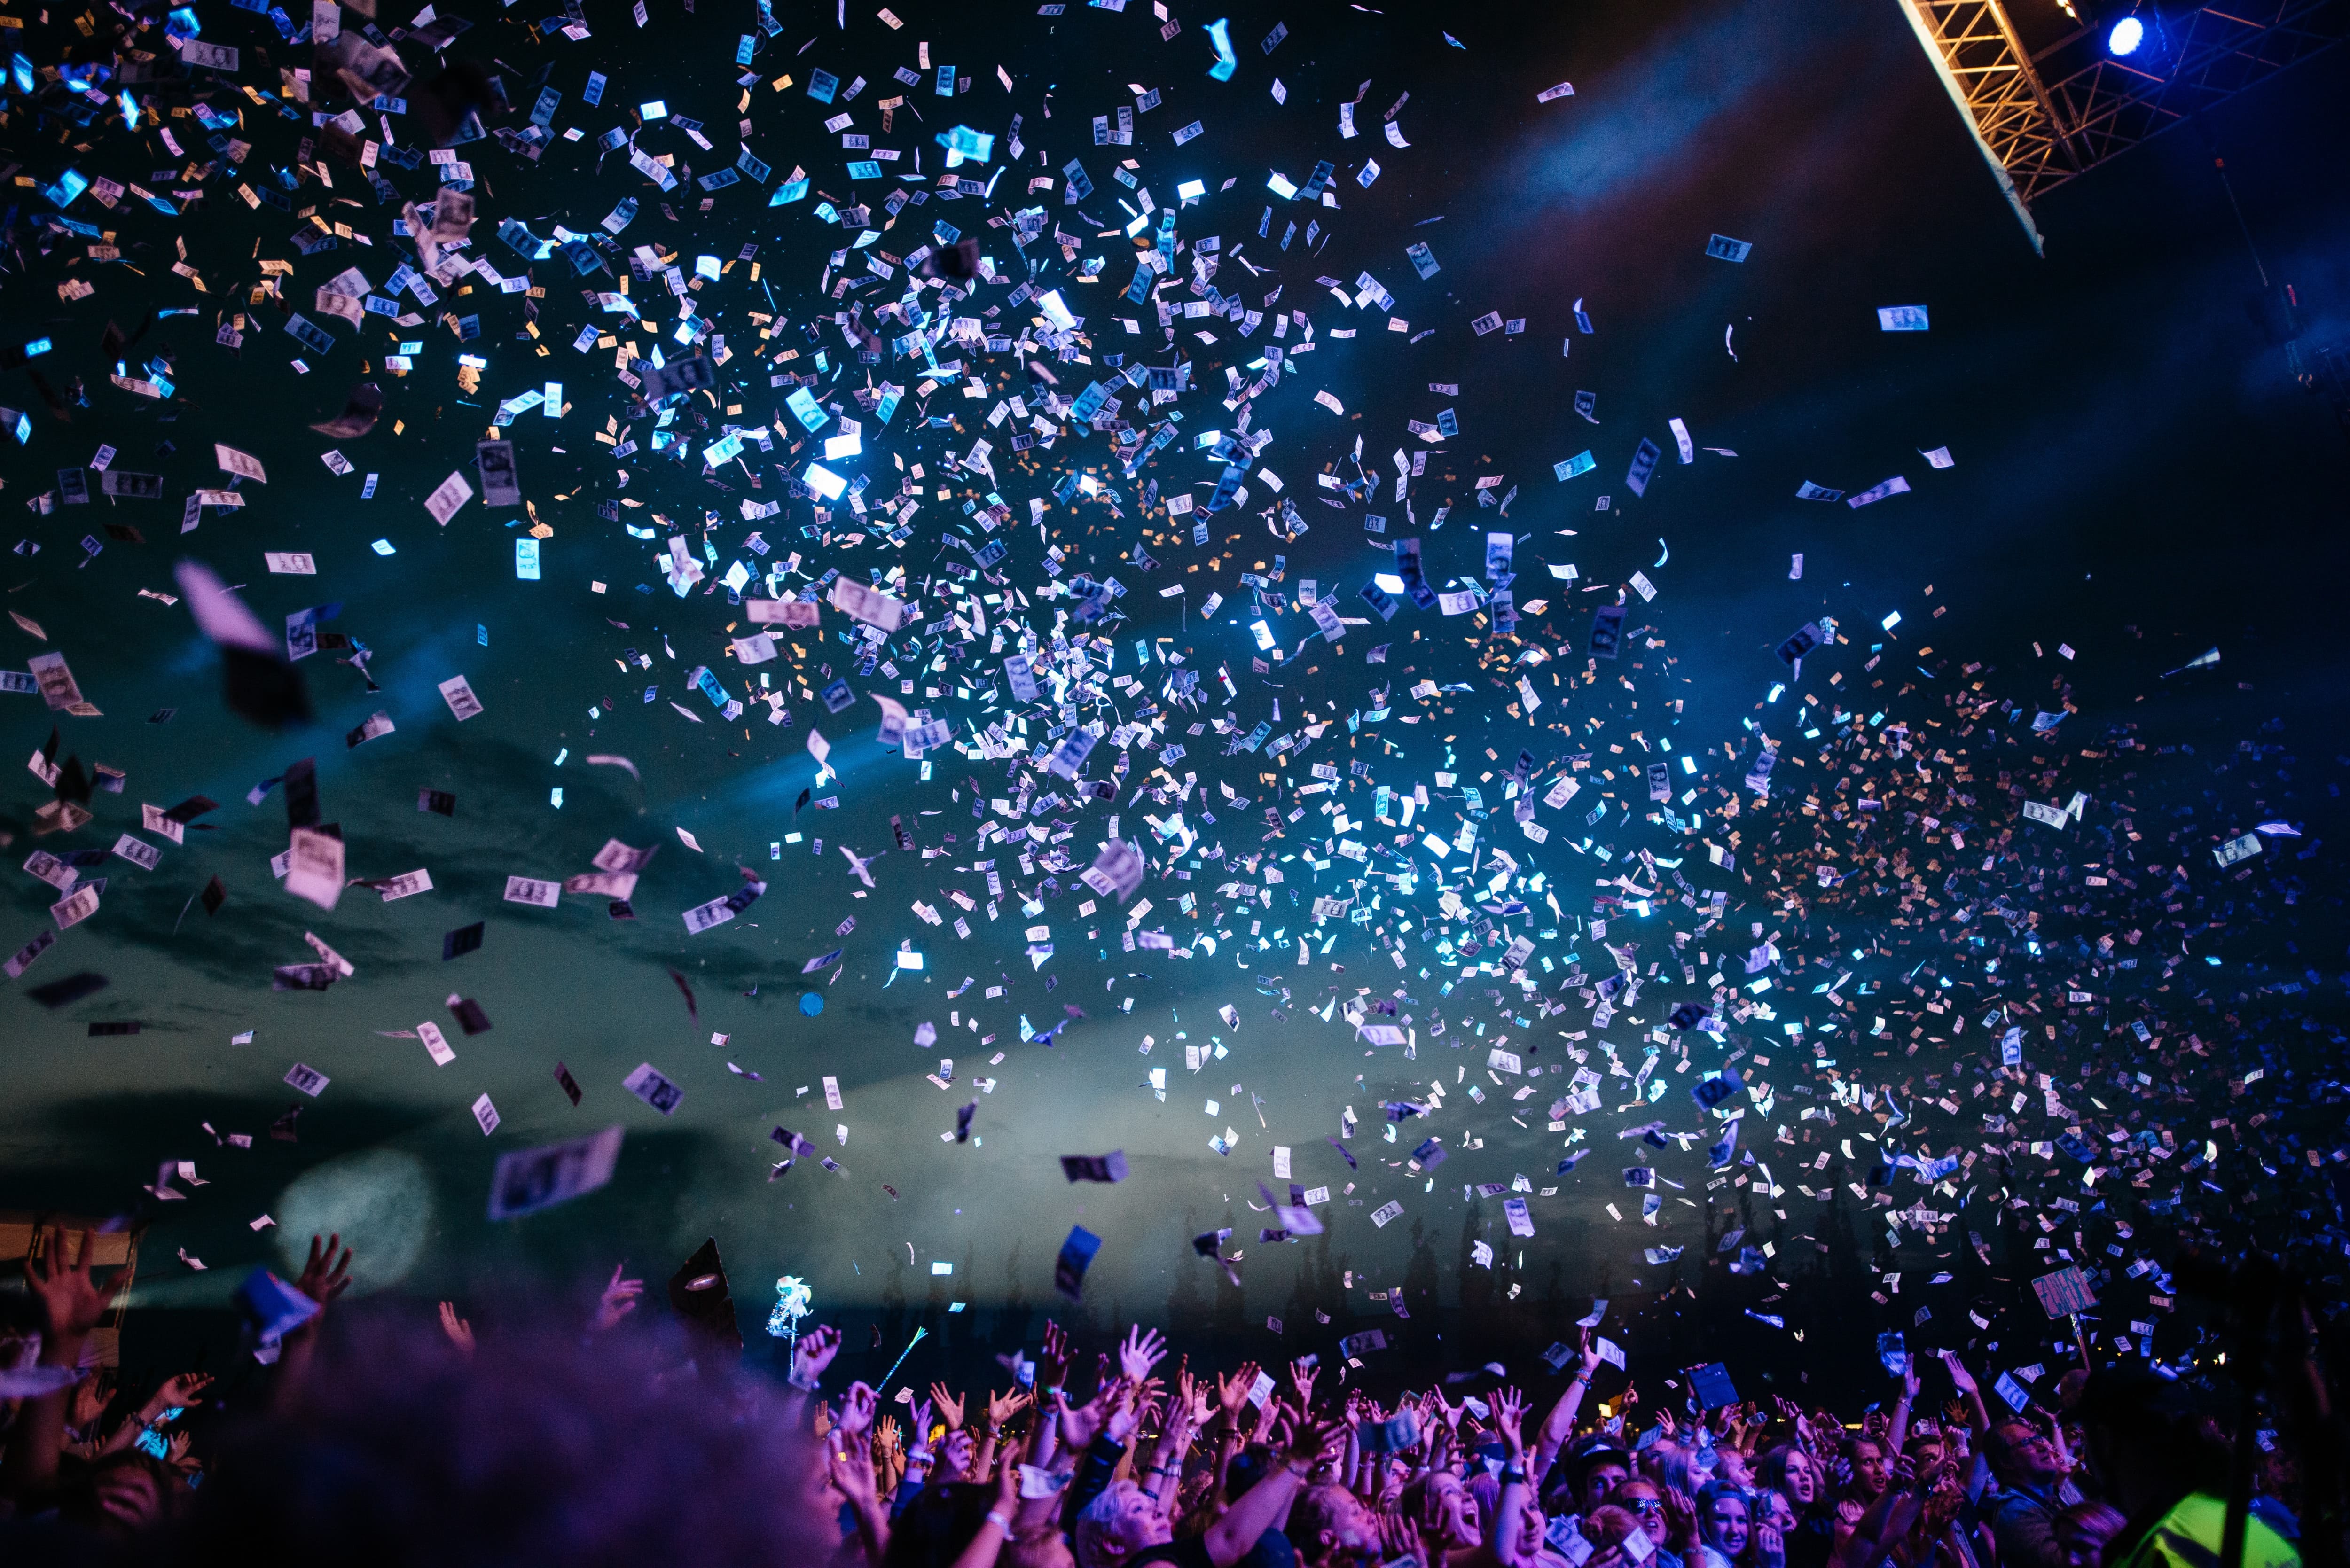 Shiny confetti being thrown onto the crowd at a music festival.